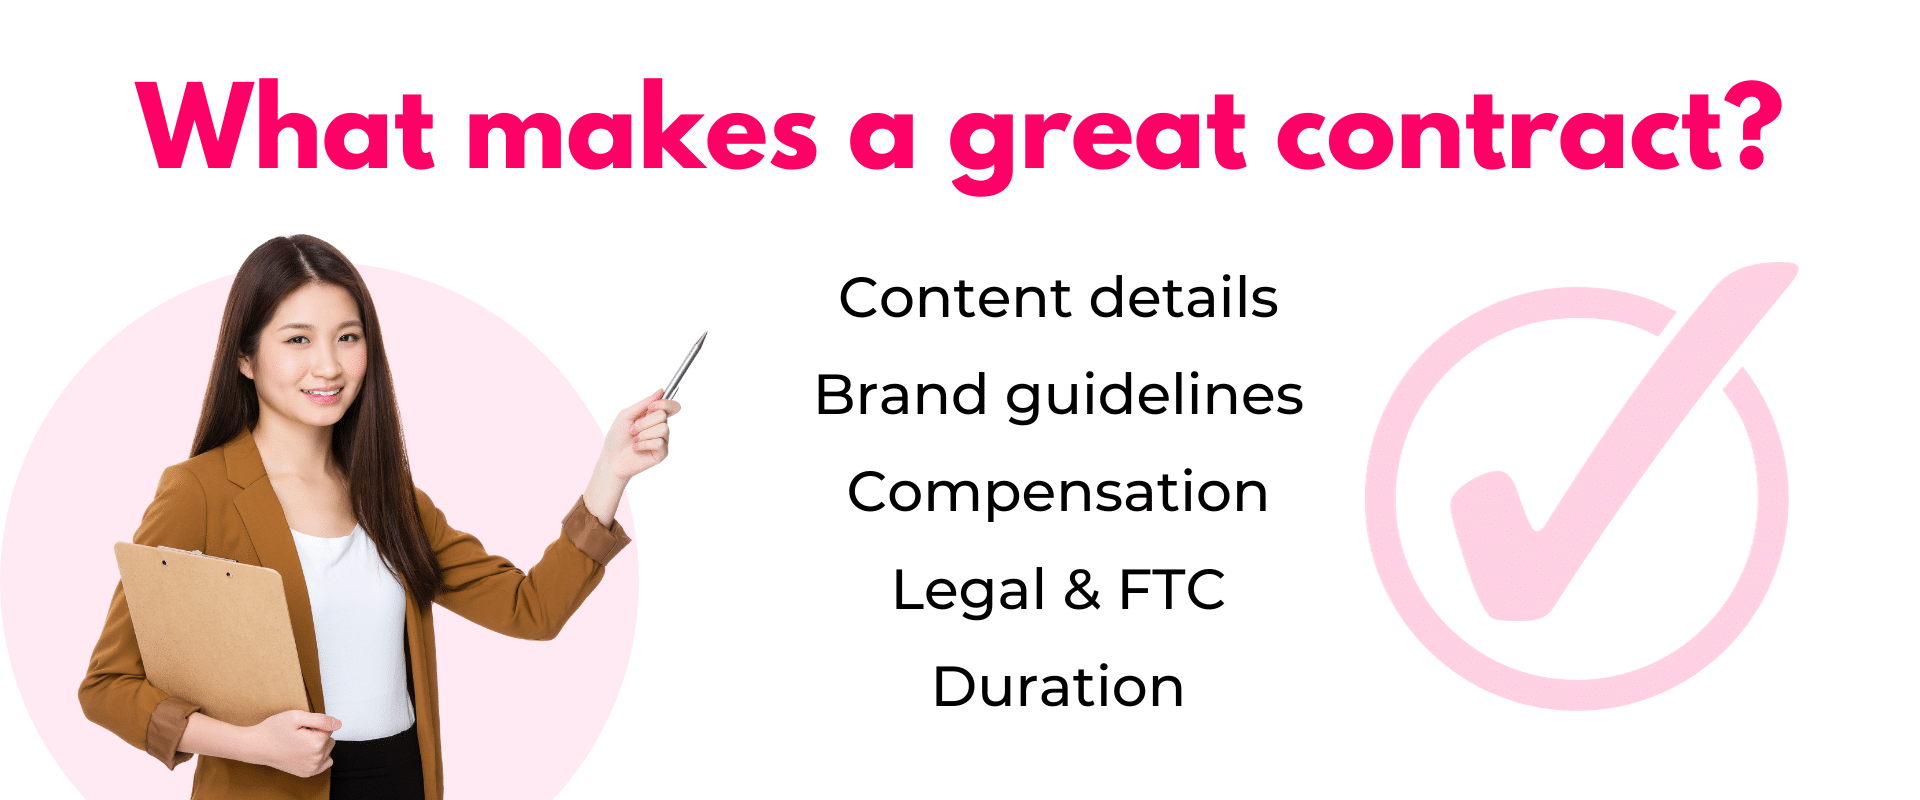 What makes a great contract?.